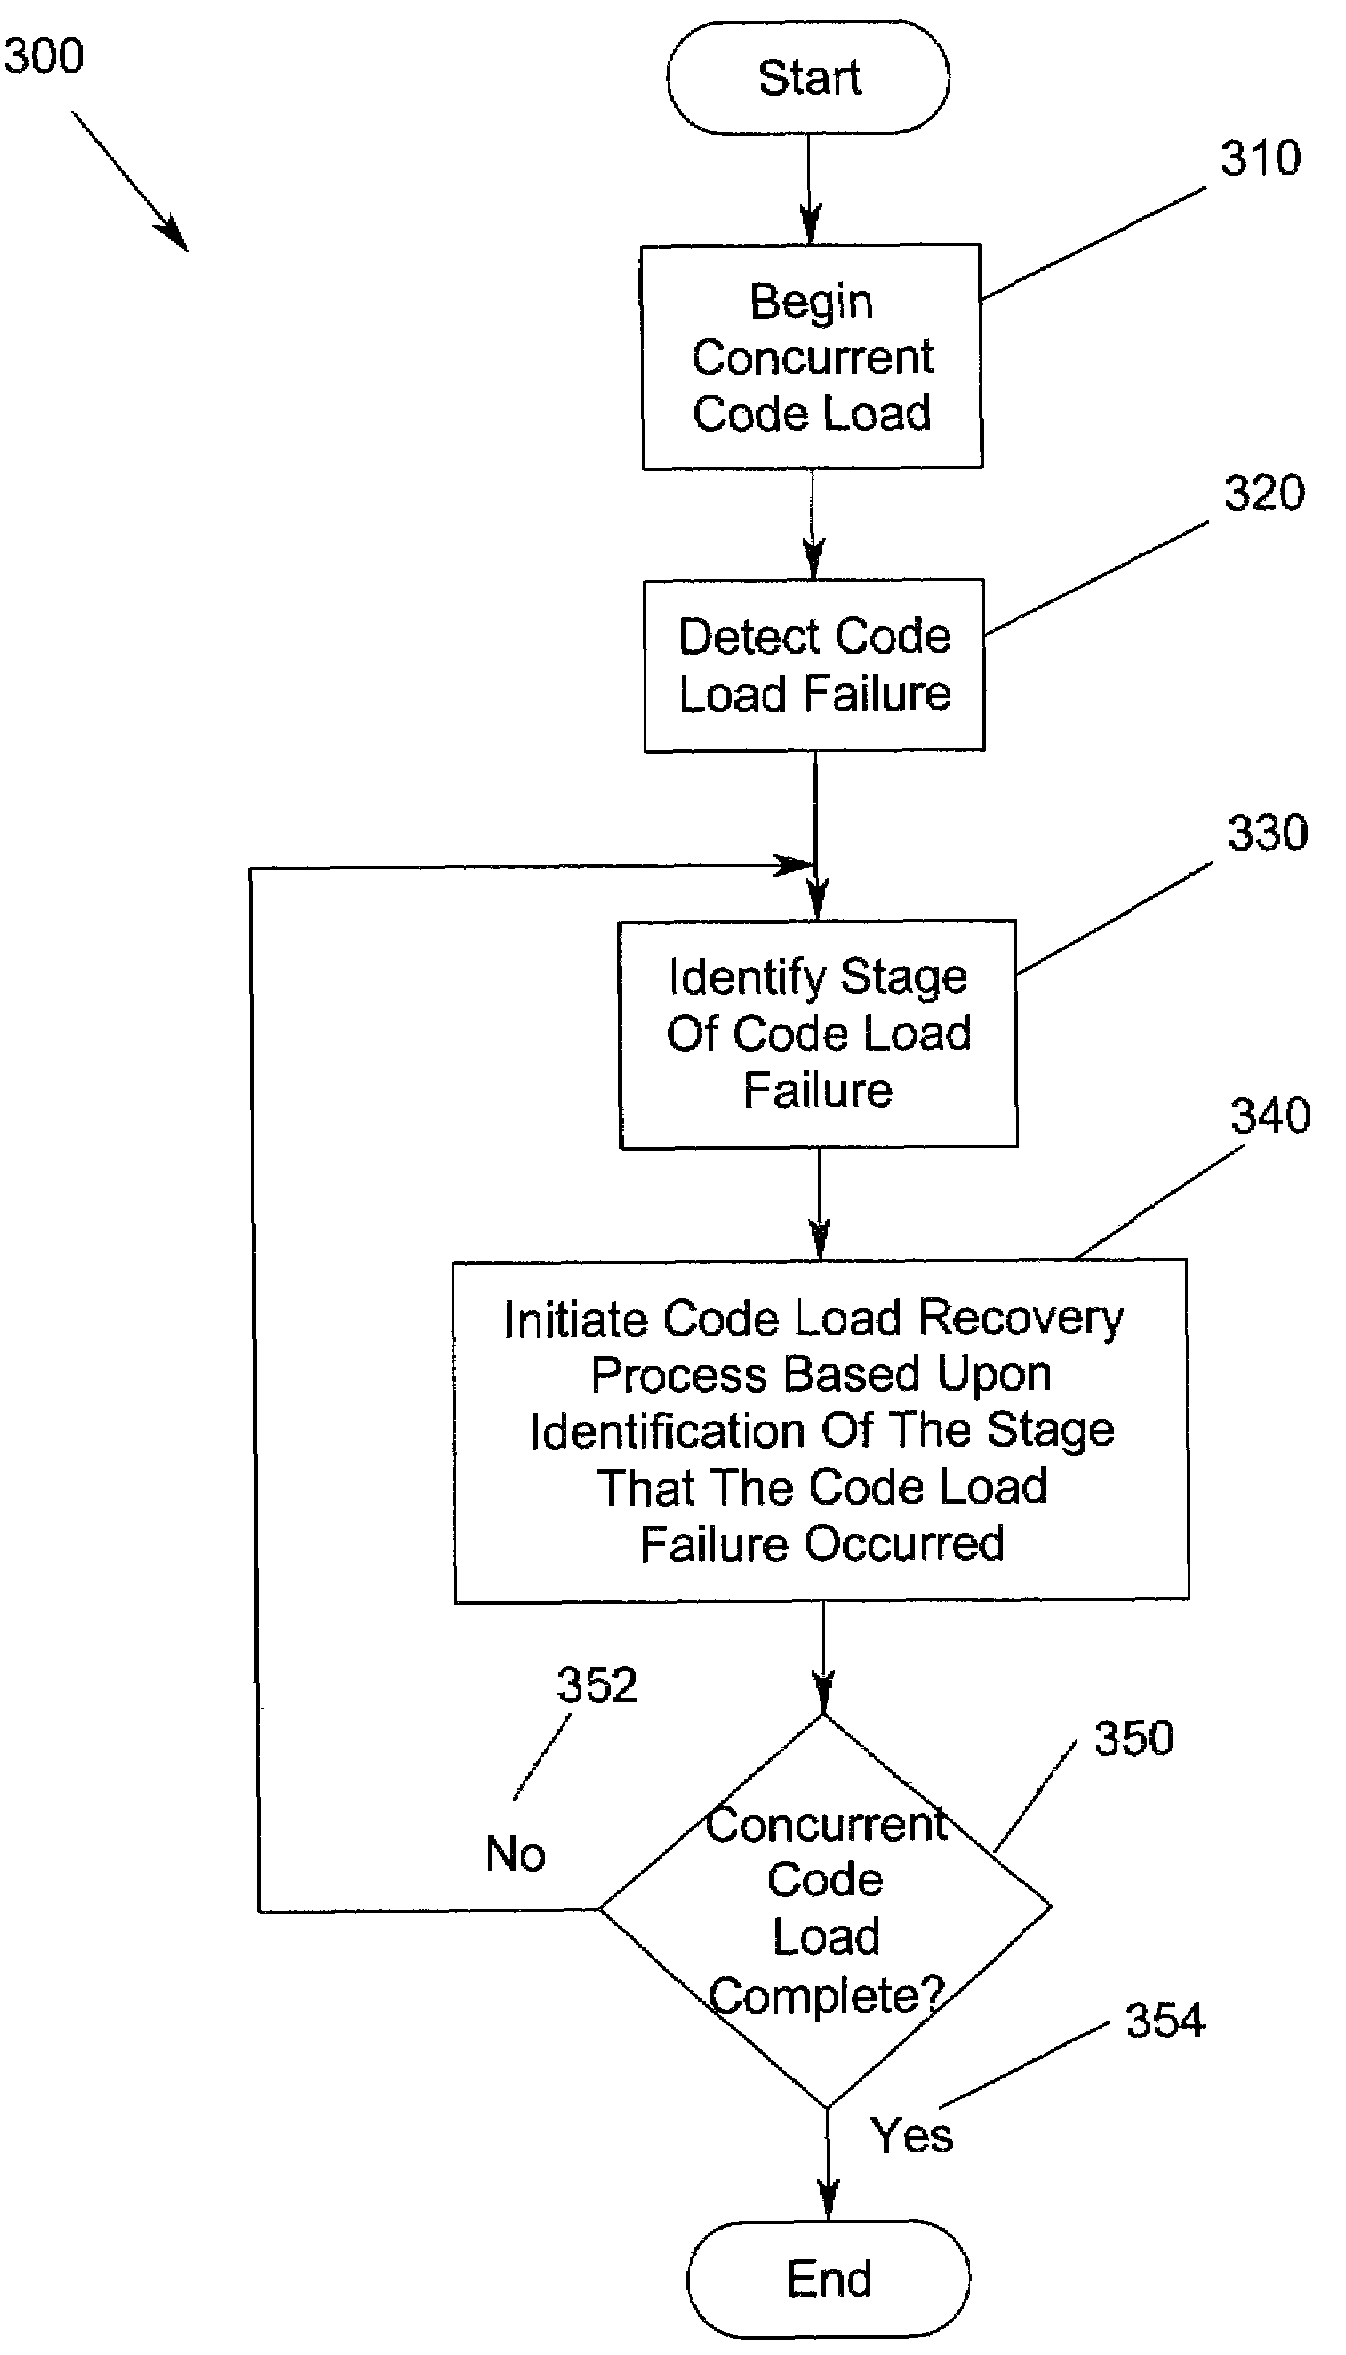 Method, apparatus and program storage device for providing automatic recovery from premature reboot of a system during a concurrent upgrade